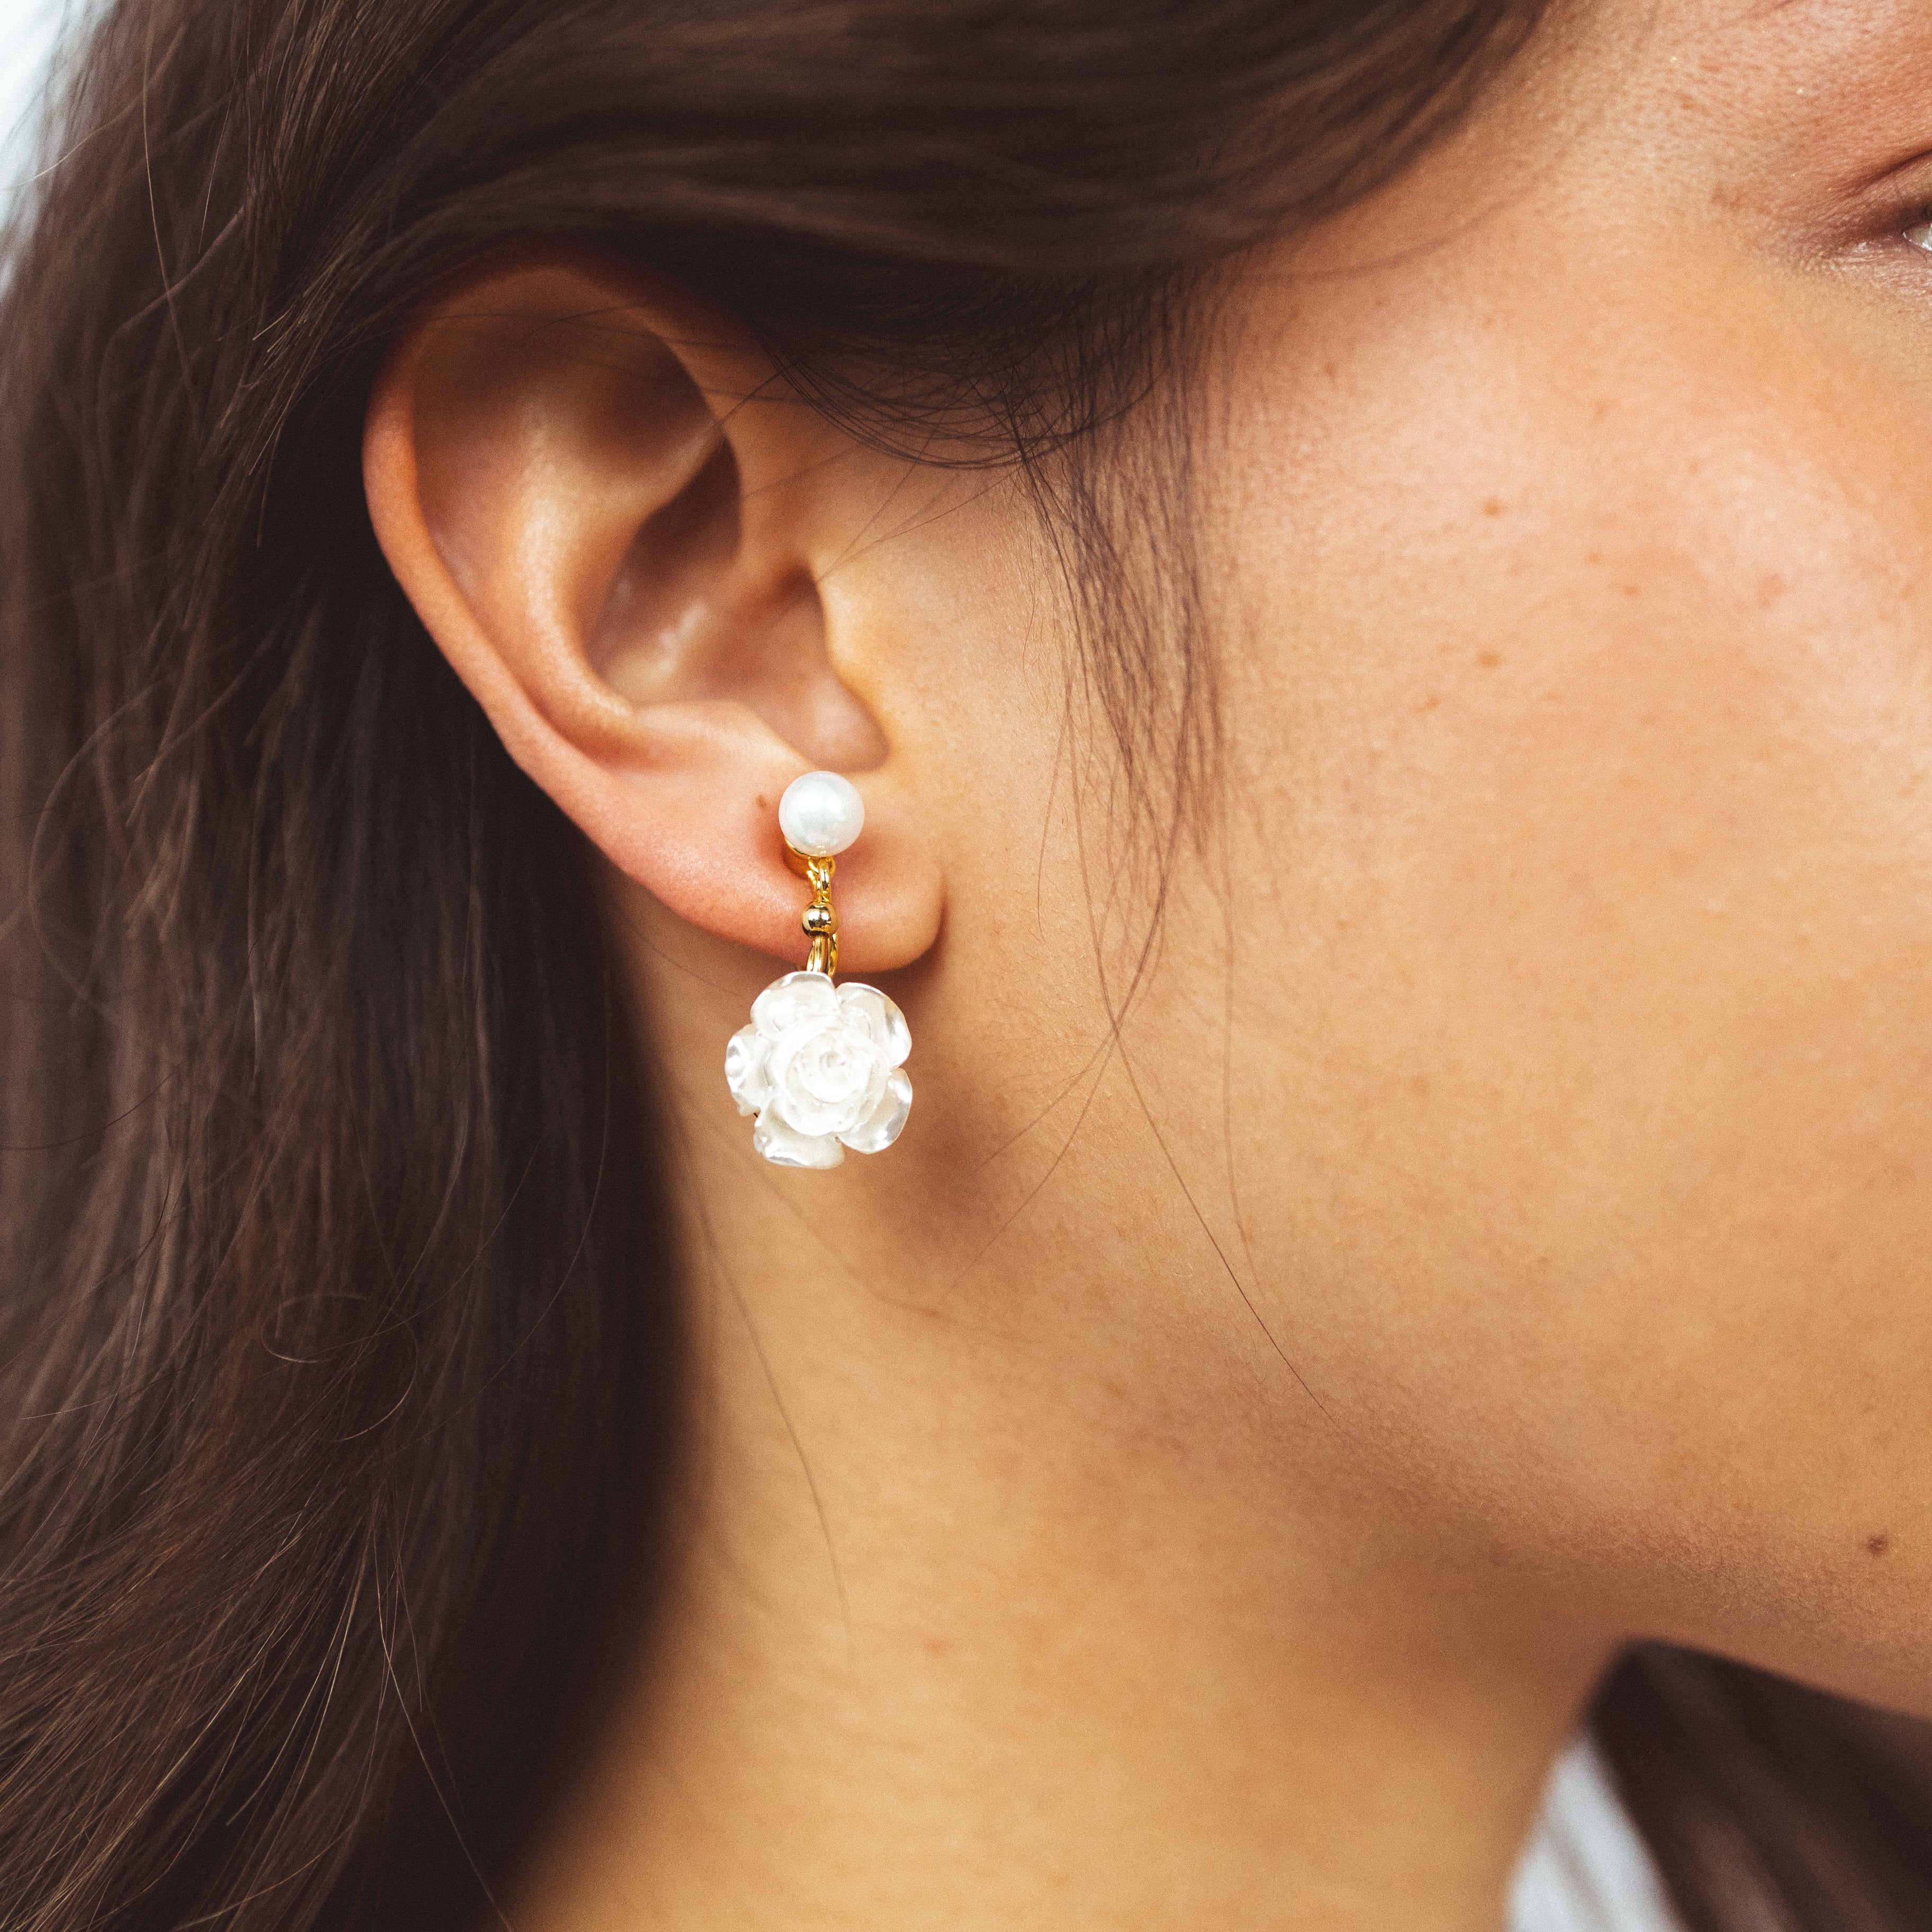 A model wearing the Rosemary Clip On Earrings. These earrings provide a secure hold for up to 24 hours and are easily adjustable for all ear types. Elevate your style without sacrificing comfort with these must-have accessories.